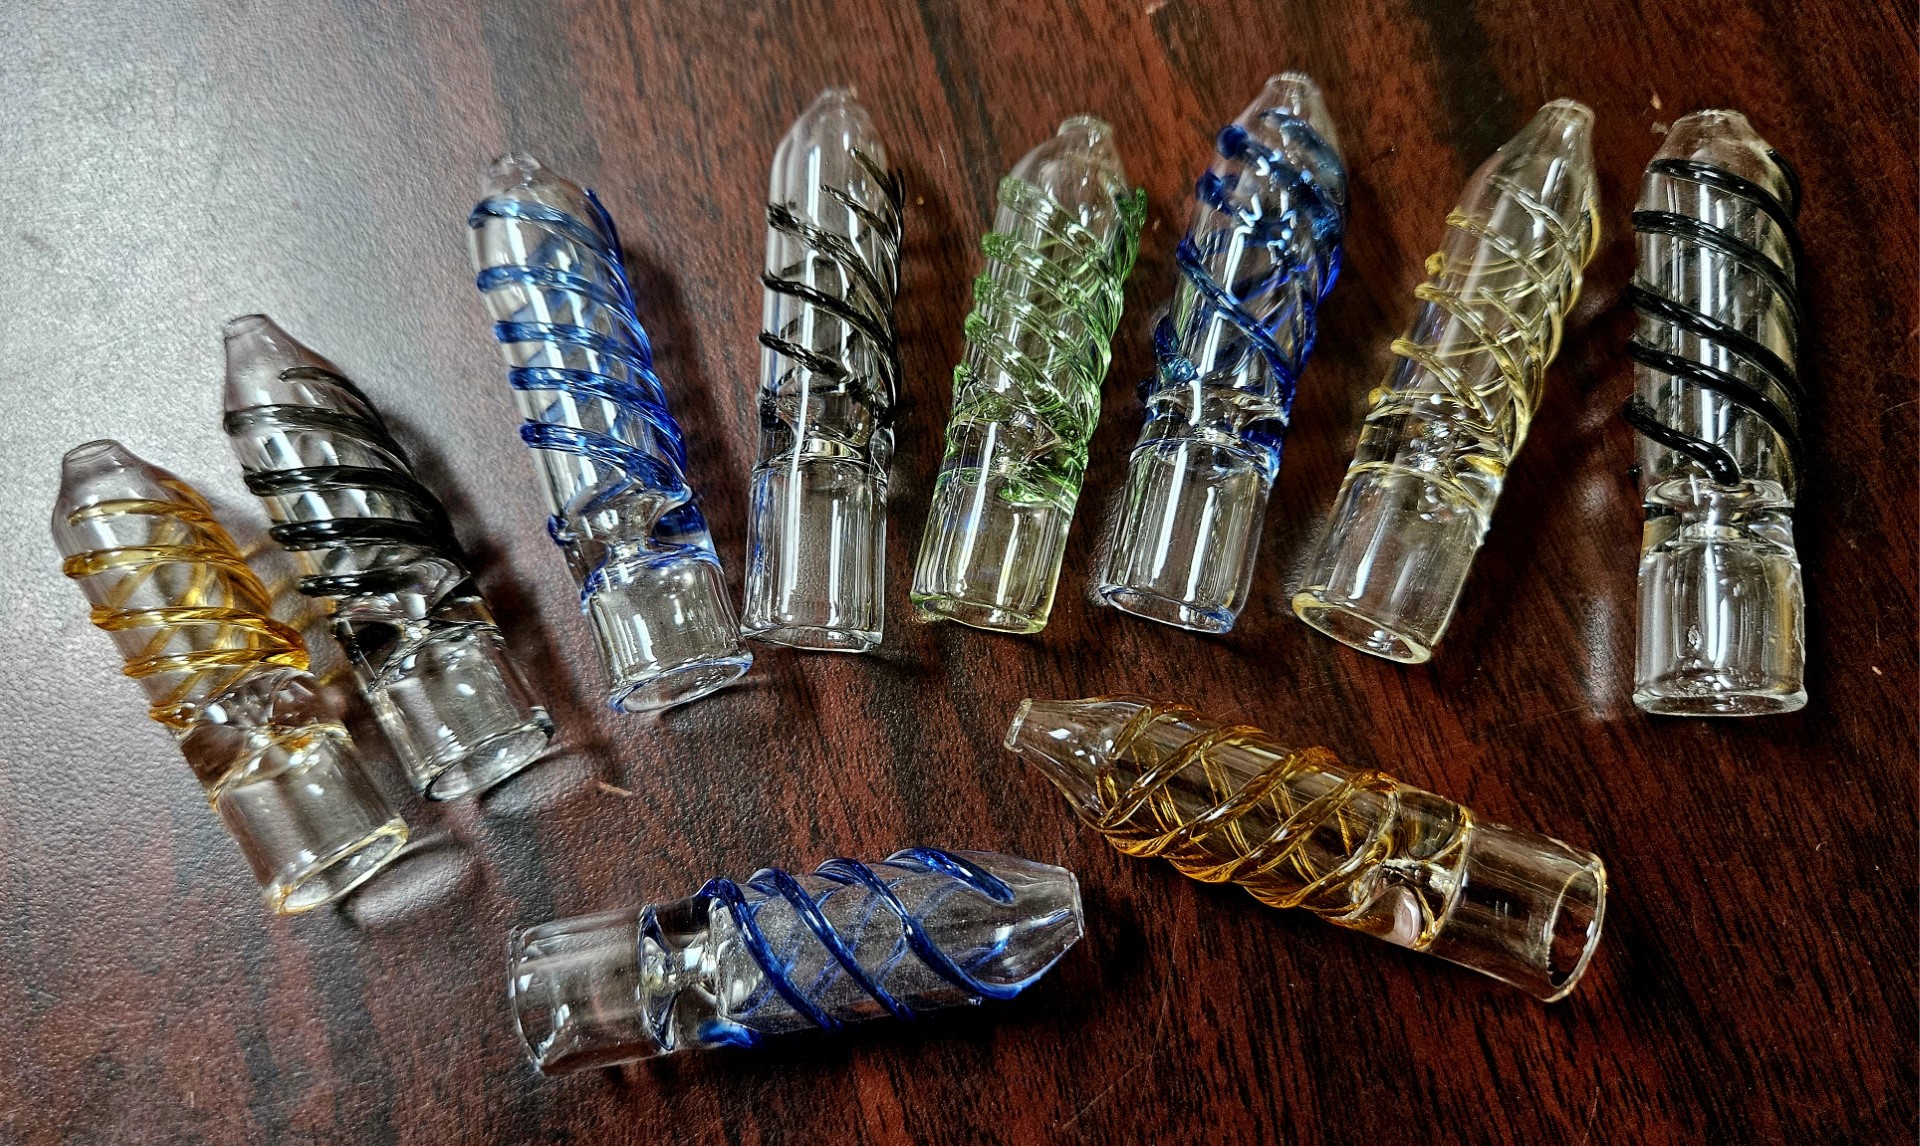 *10 Pack-2" Smoq Brand Glass Chillums with Stripes #CH13B